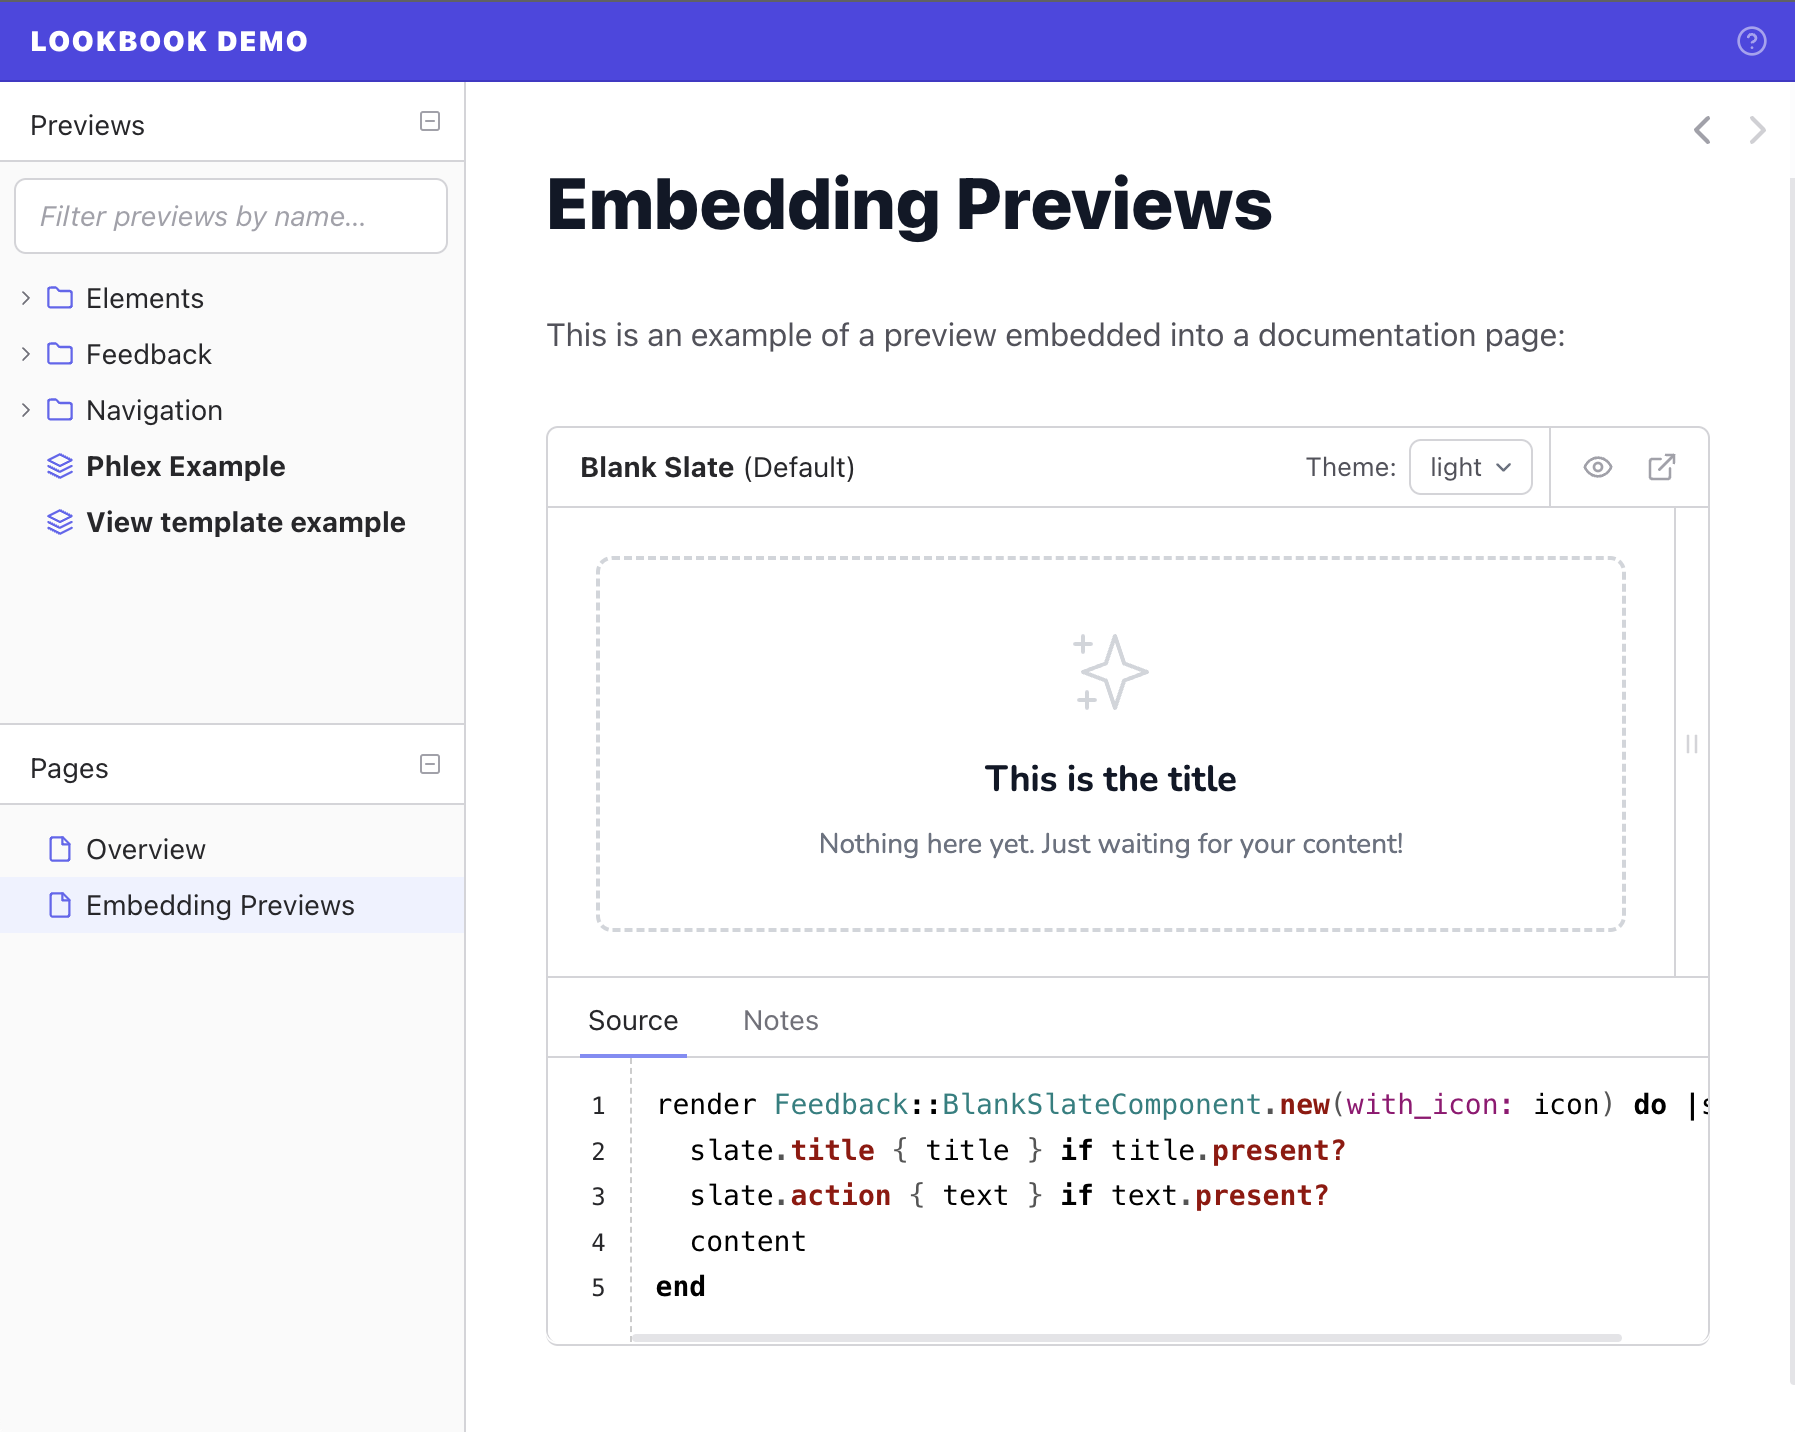 Preview embed with source and notes panels